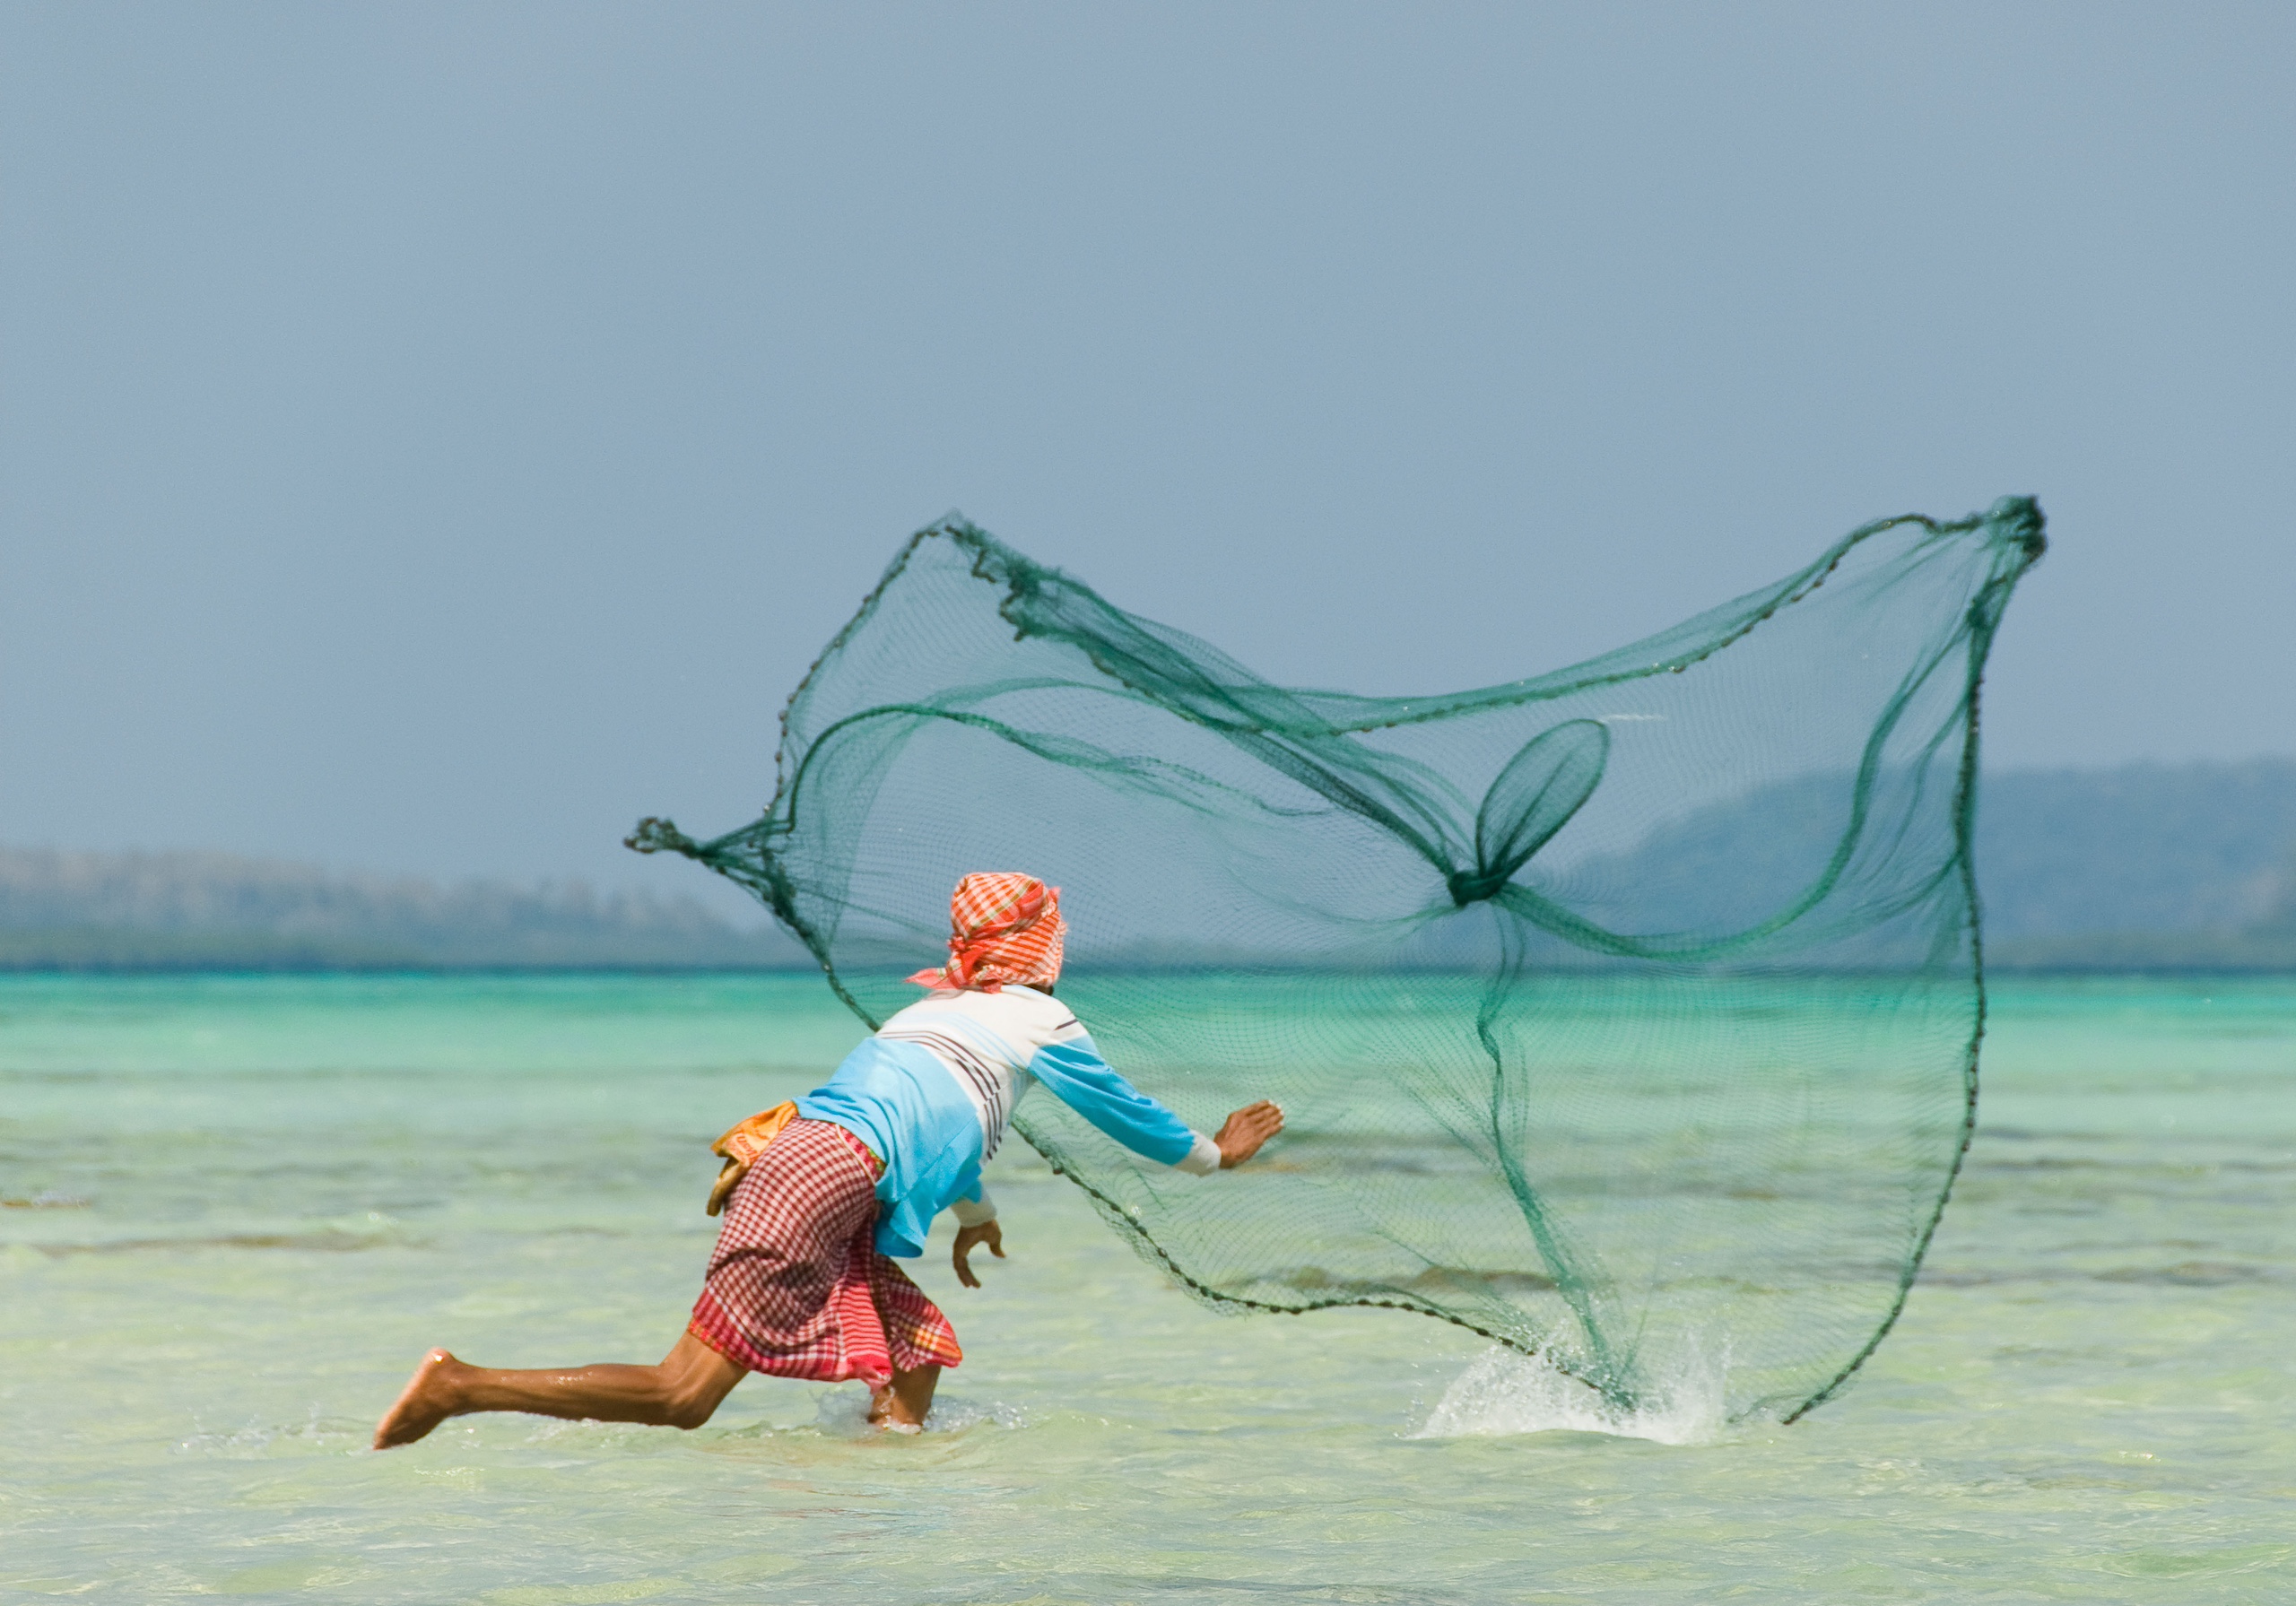 <p>A fisherman casts his net wide in the Andaman Sea. Despite being surrounded by water, freshwater is in short supply across the 836 islands that make up the Andaman Islands archipelago (Image: David Pearson / Alamy).</p>